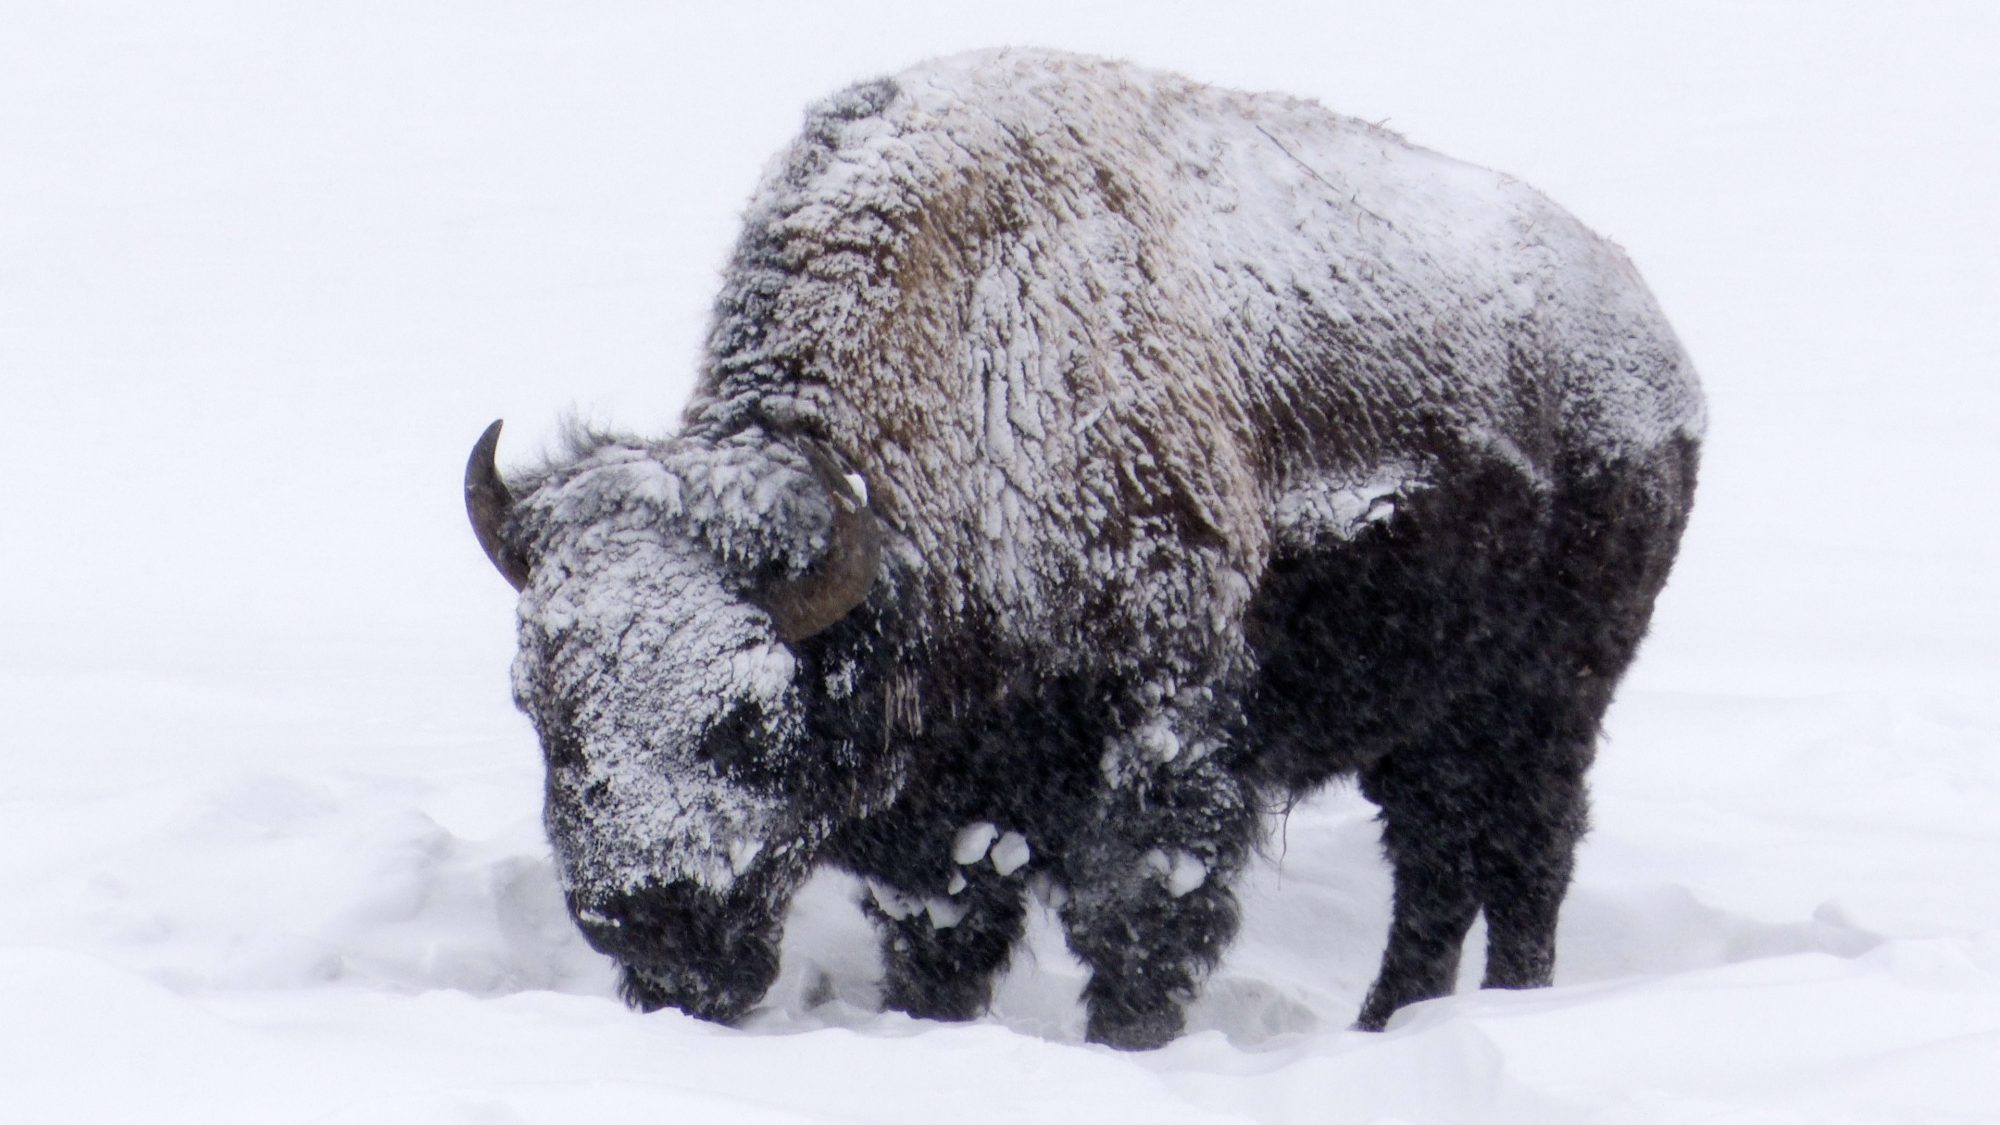 Snowy bison of Yellowstone, 2019